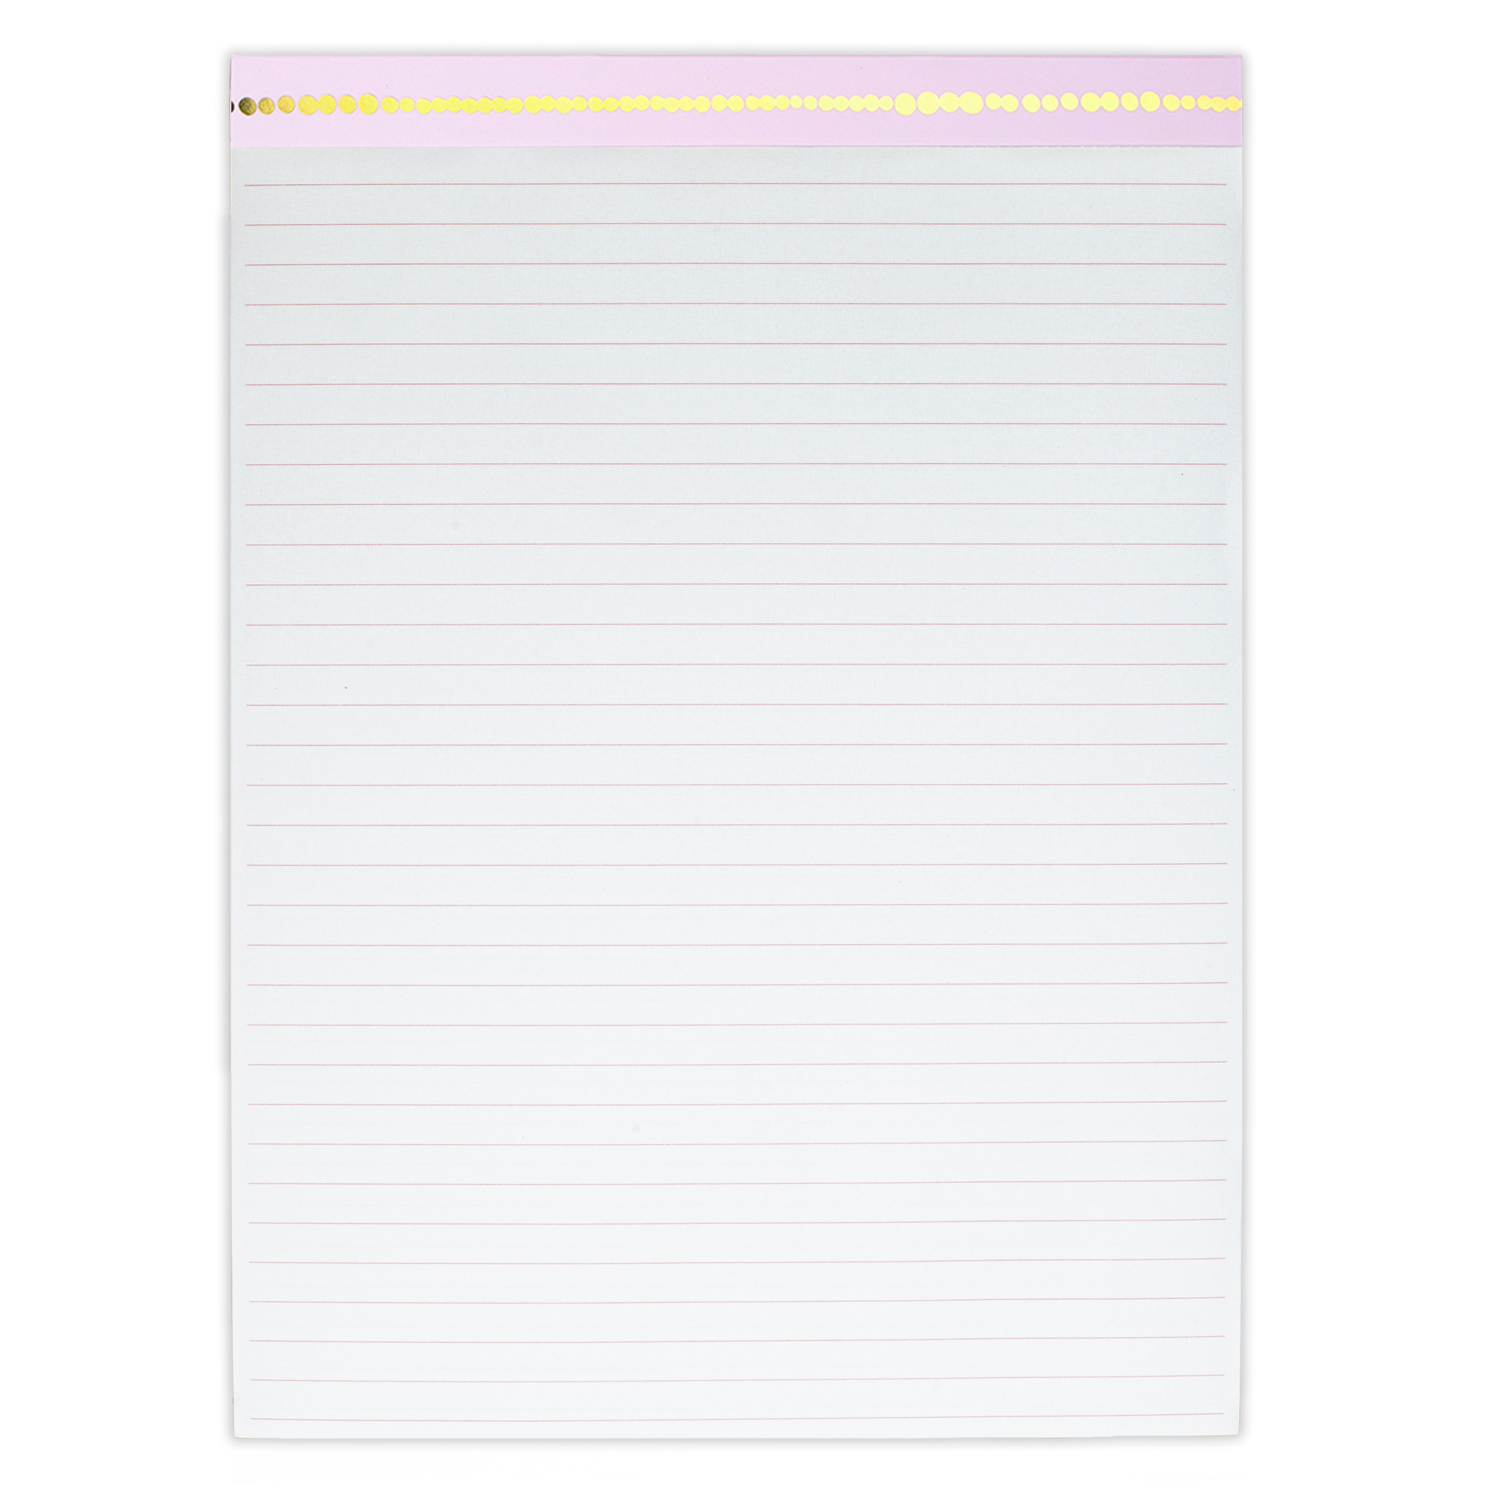 2-pack of lined writing pads with 40 pages each to refill clipboard folios